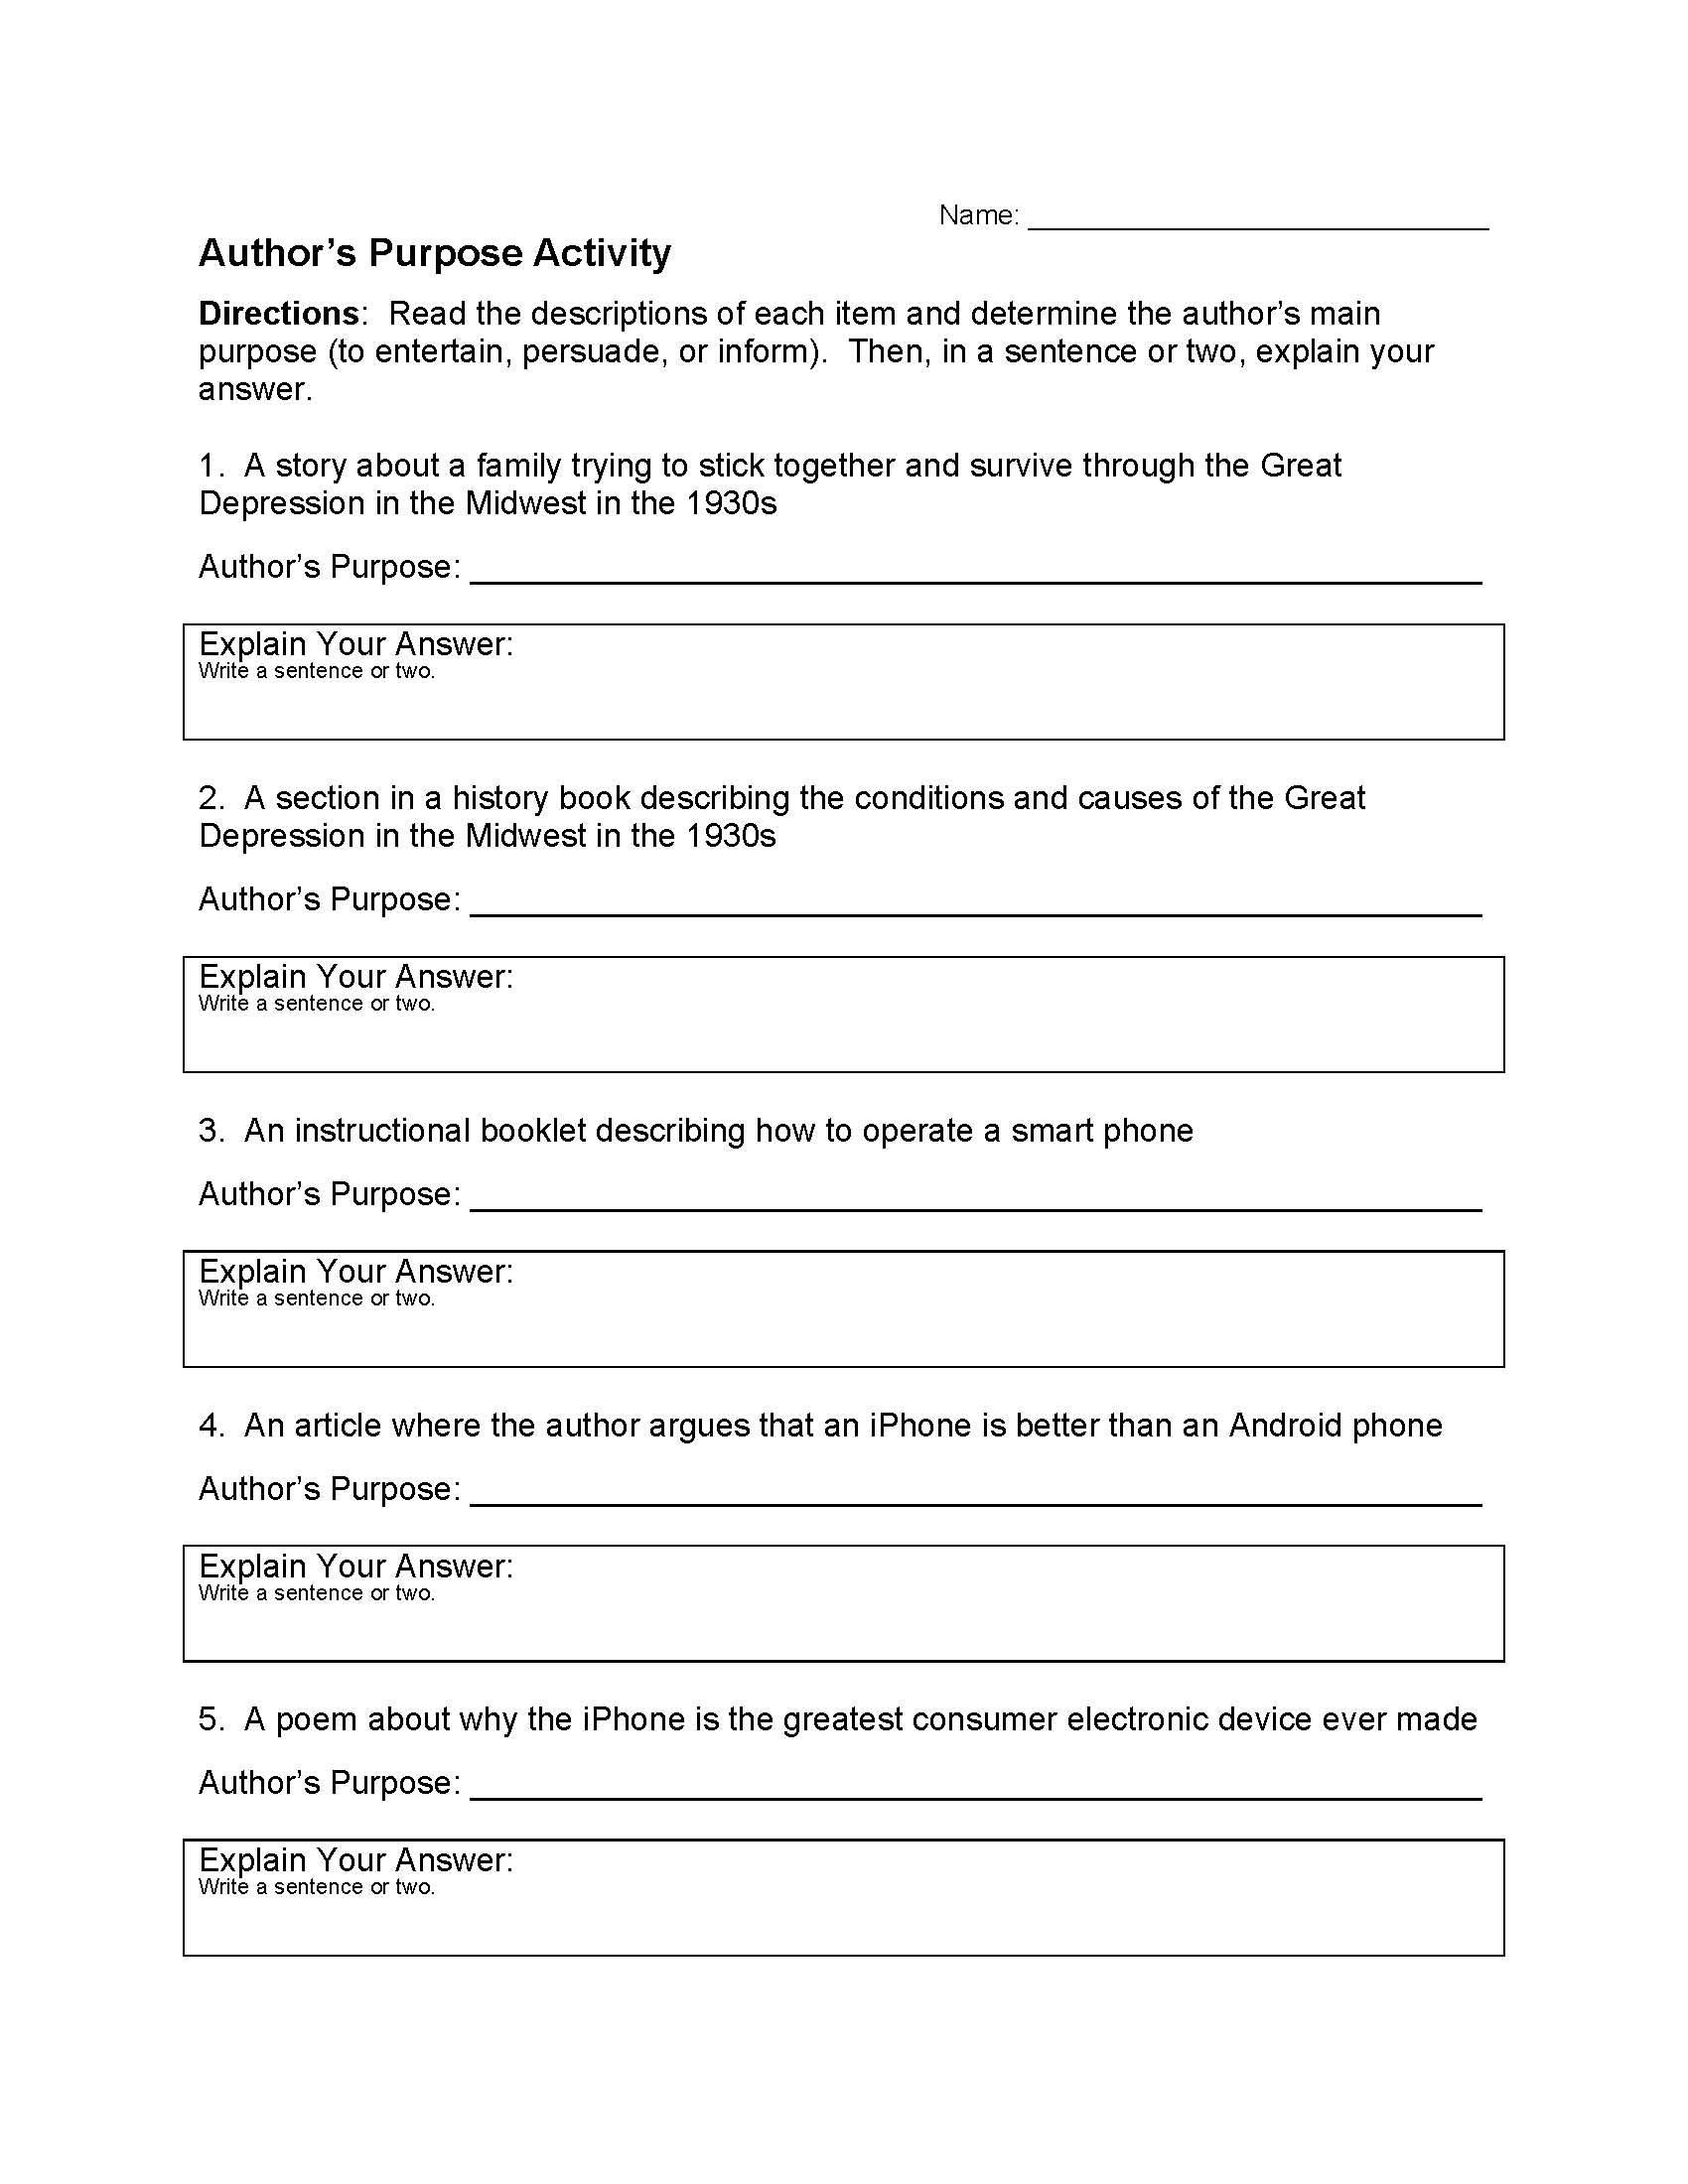 author-s-purpose-worksheet-1-preview-db-excel